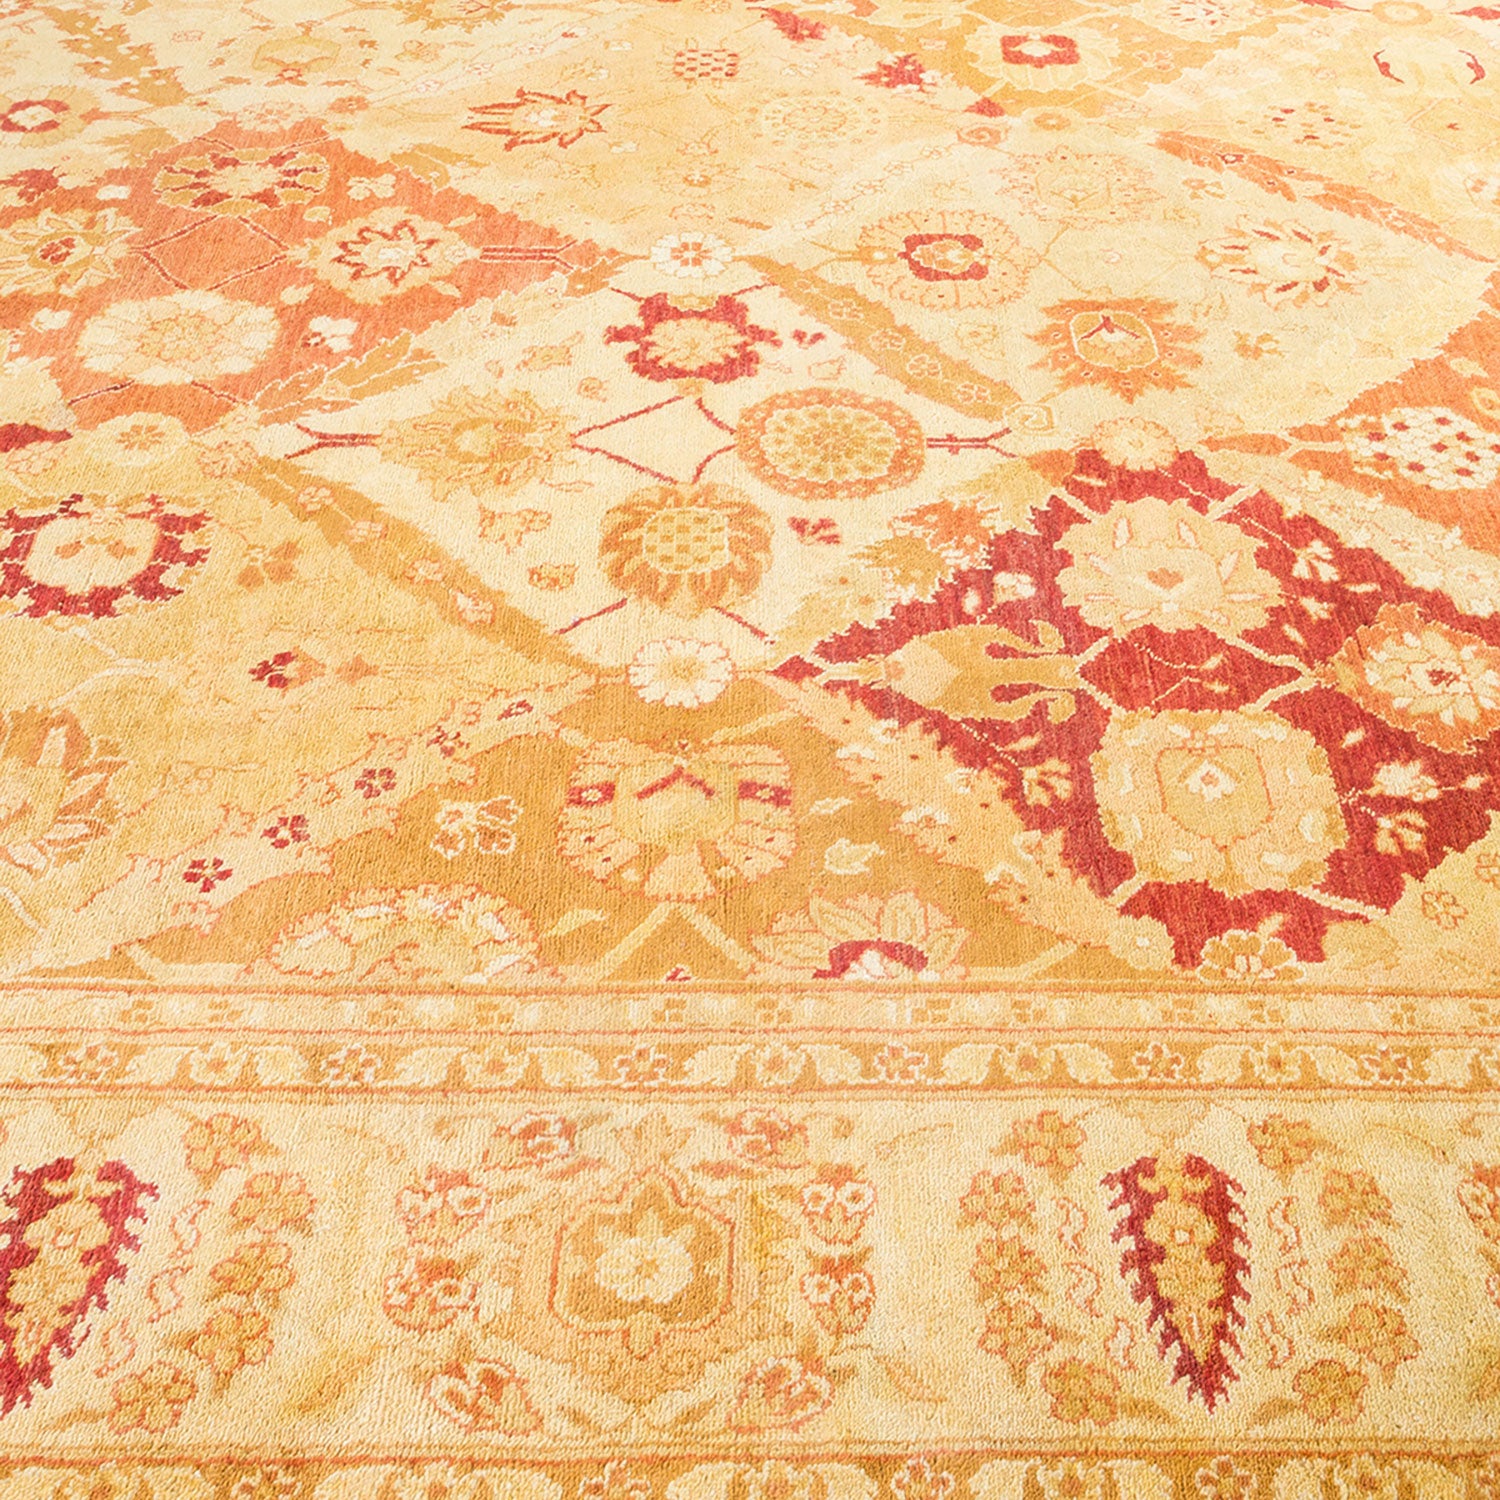 Exquisite and well-crafted carpet showcases intricate patterns in warm hues.